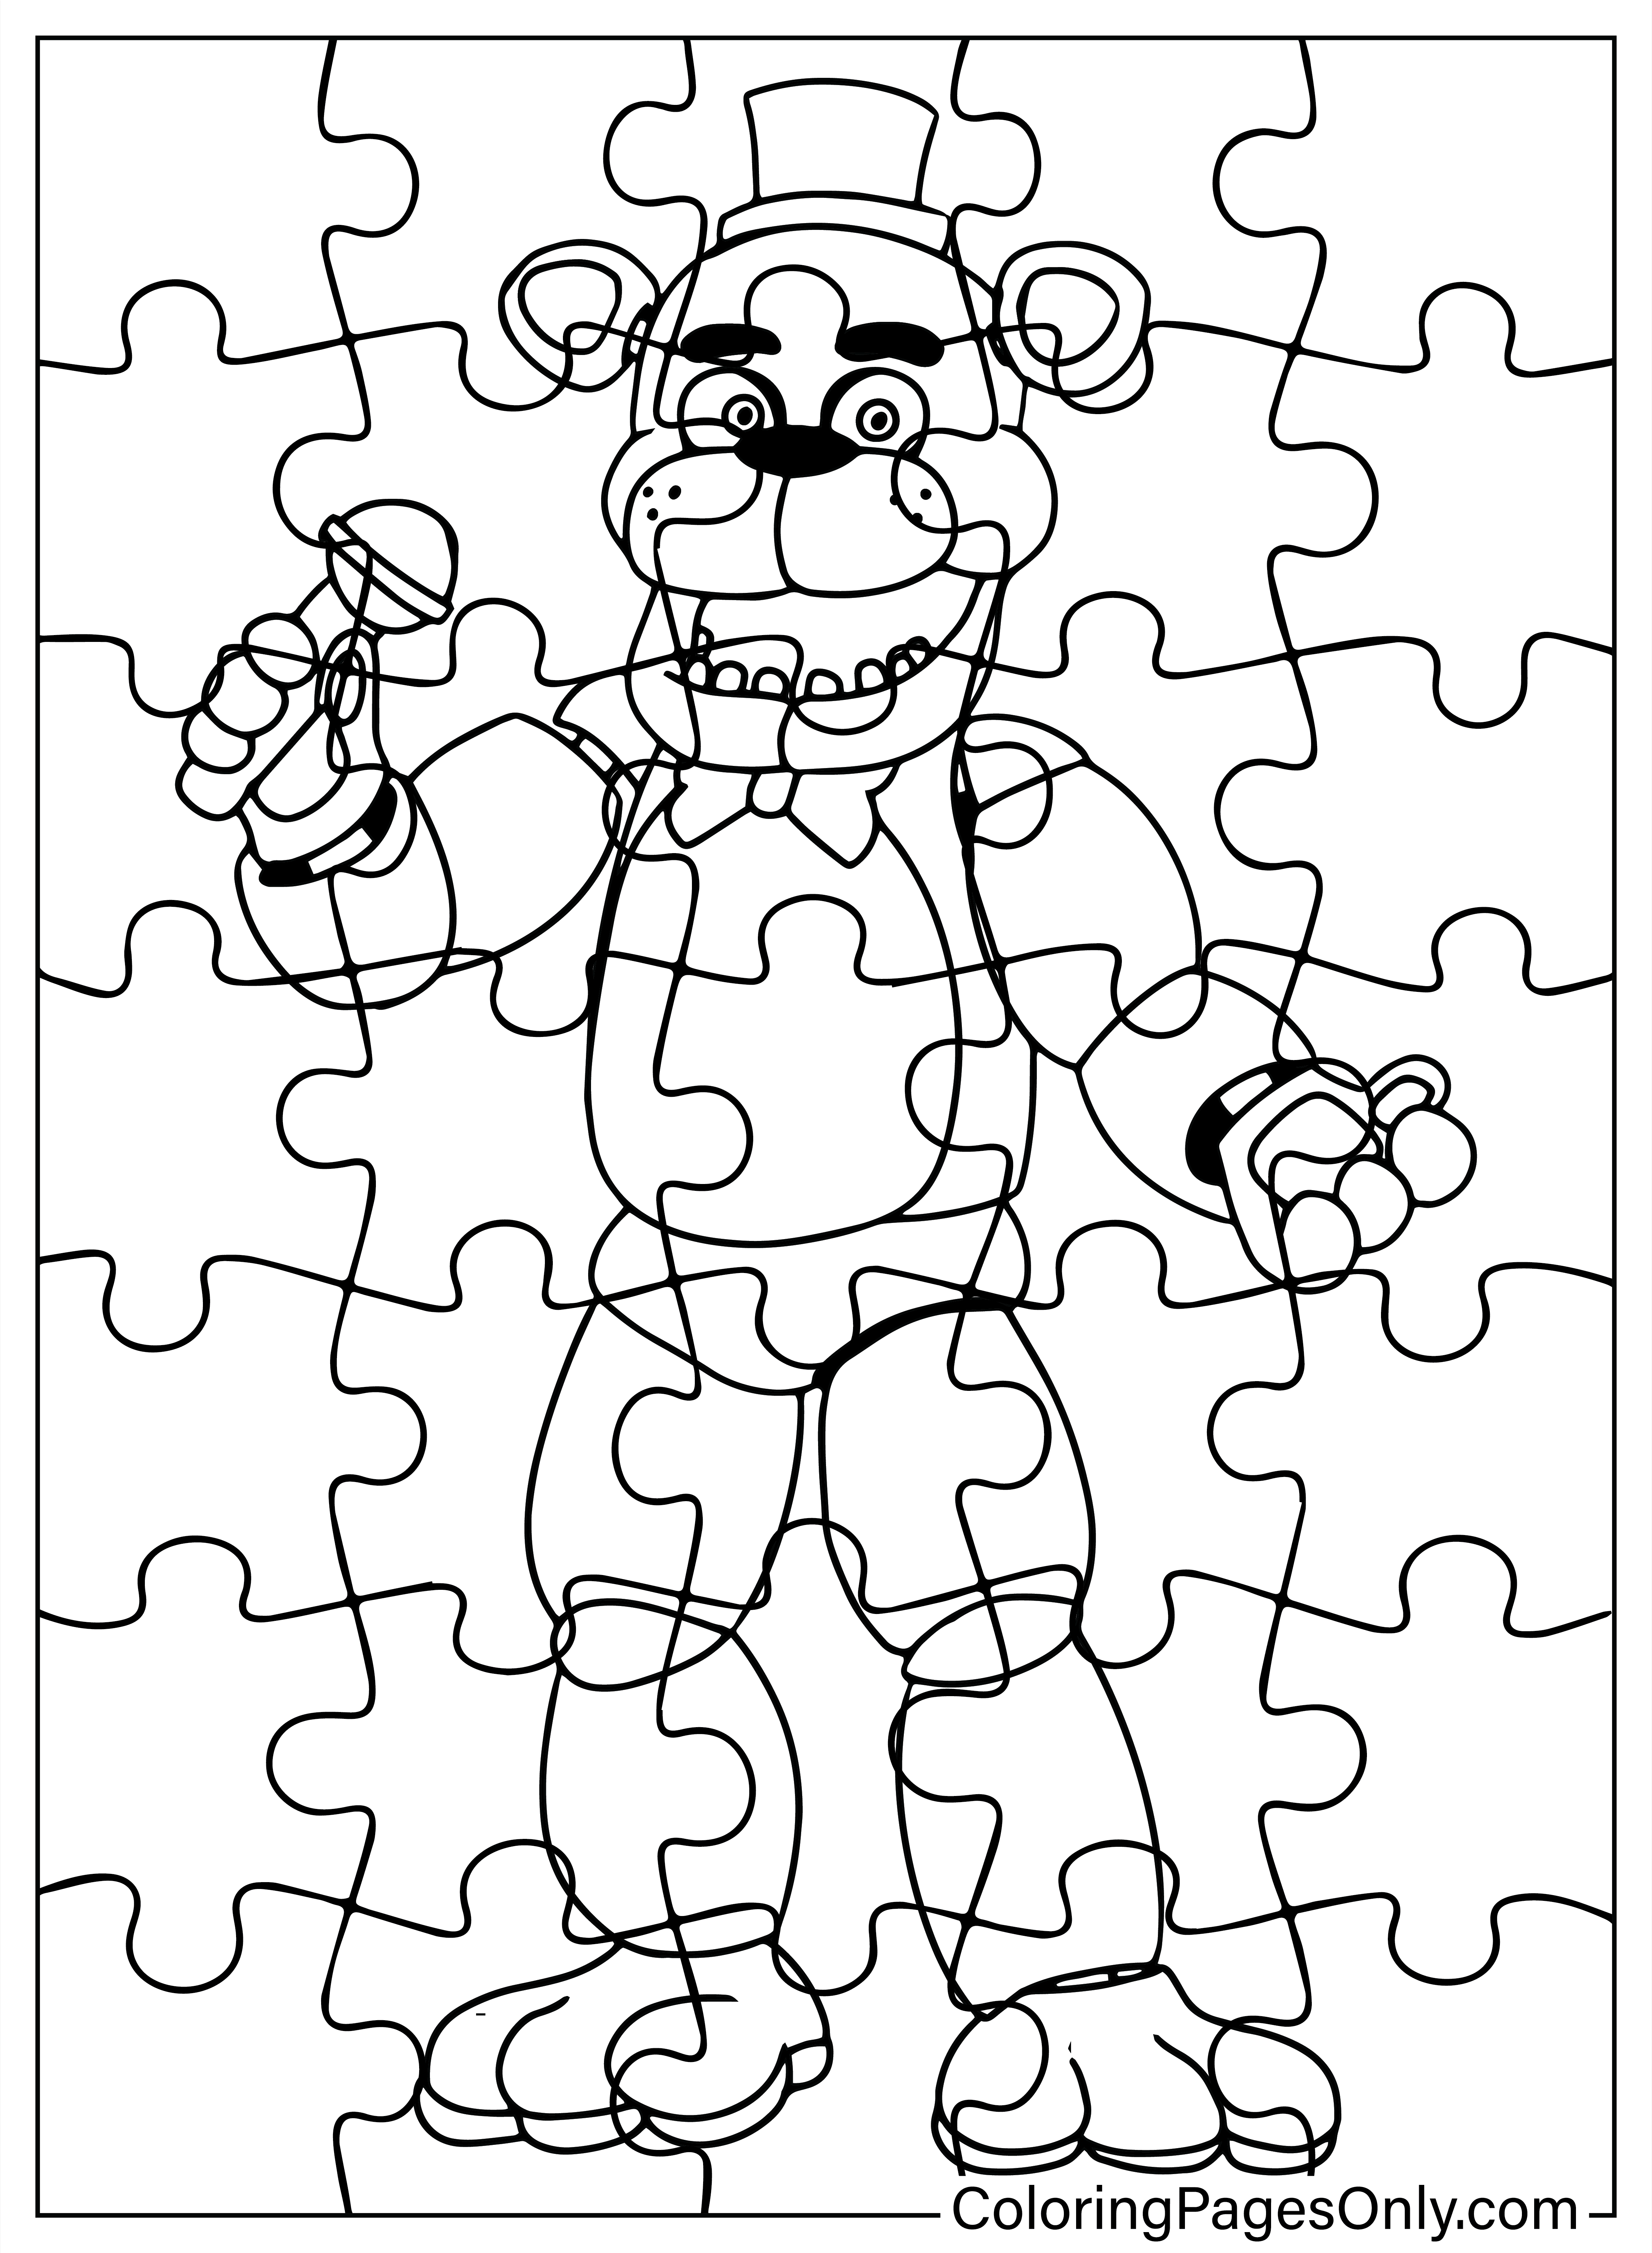 Freddy Fazbear Coloring Pages to Printable